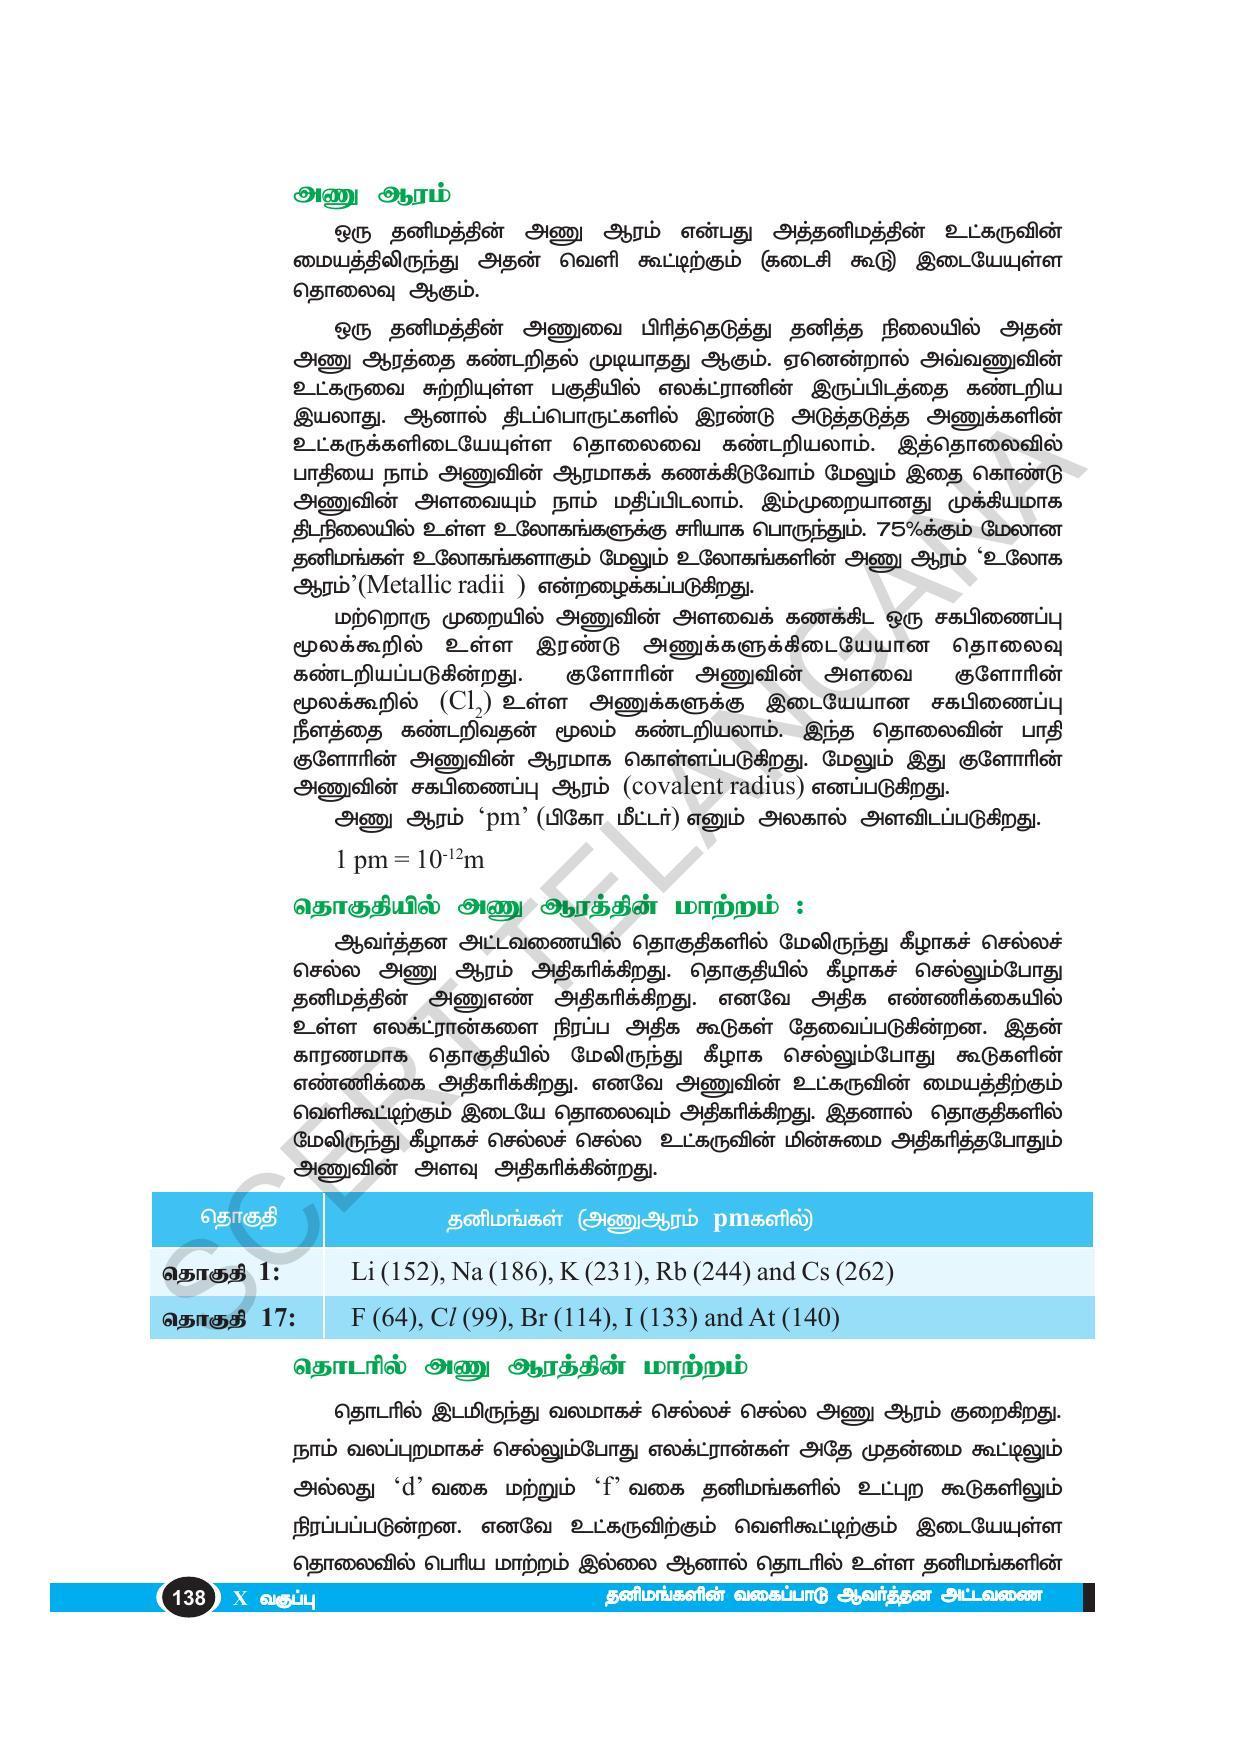 TS SCERT Class 10 Physical Science(Tamil Medium) Text Book - Page 150